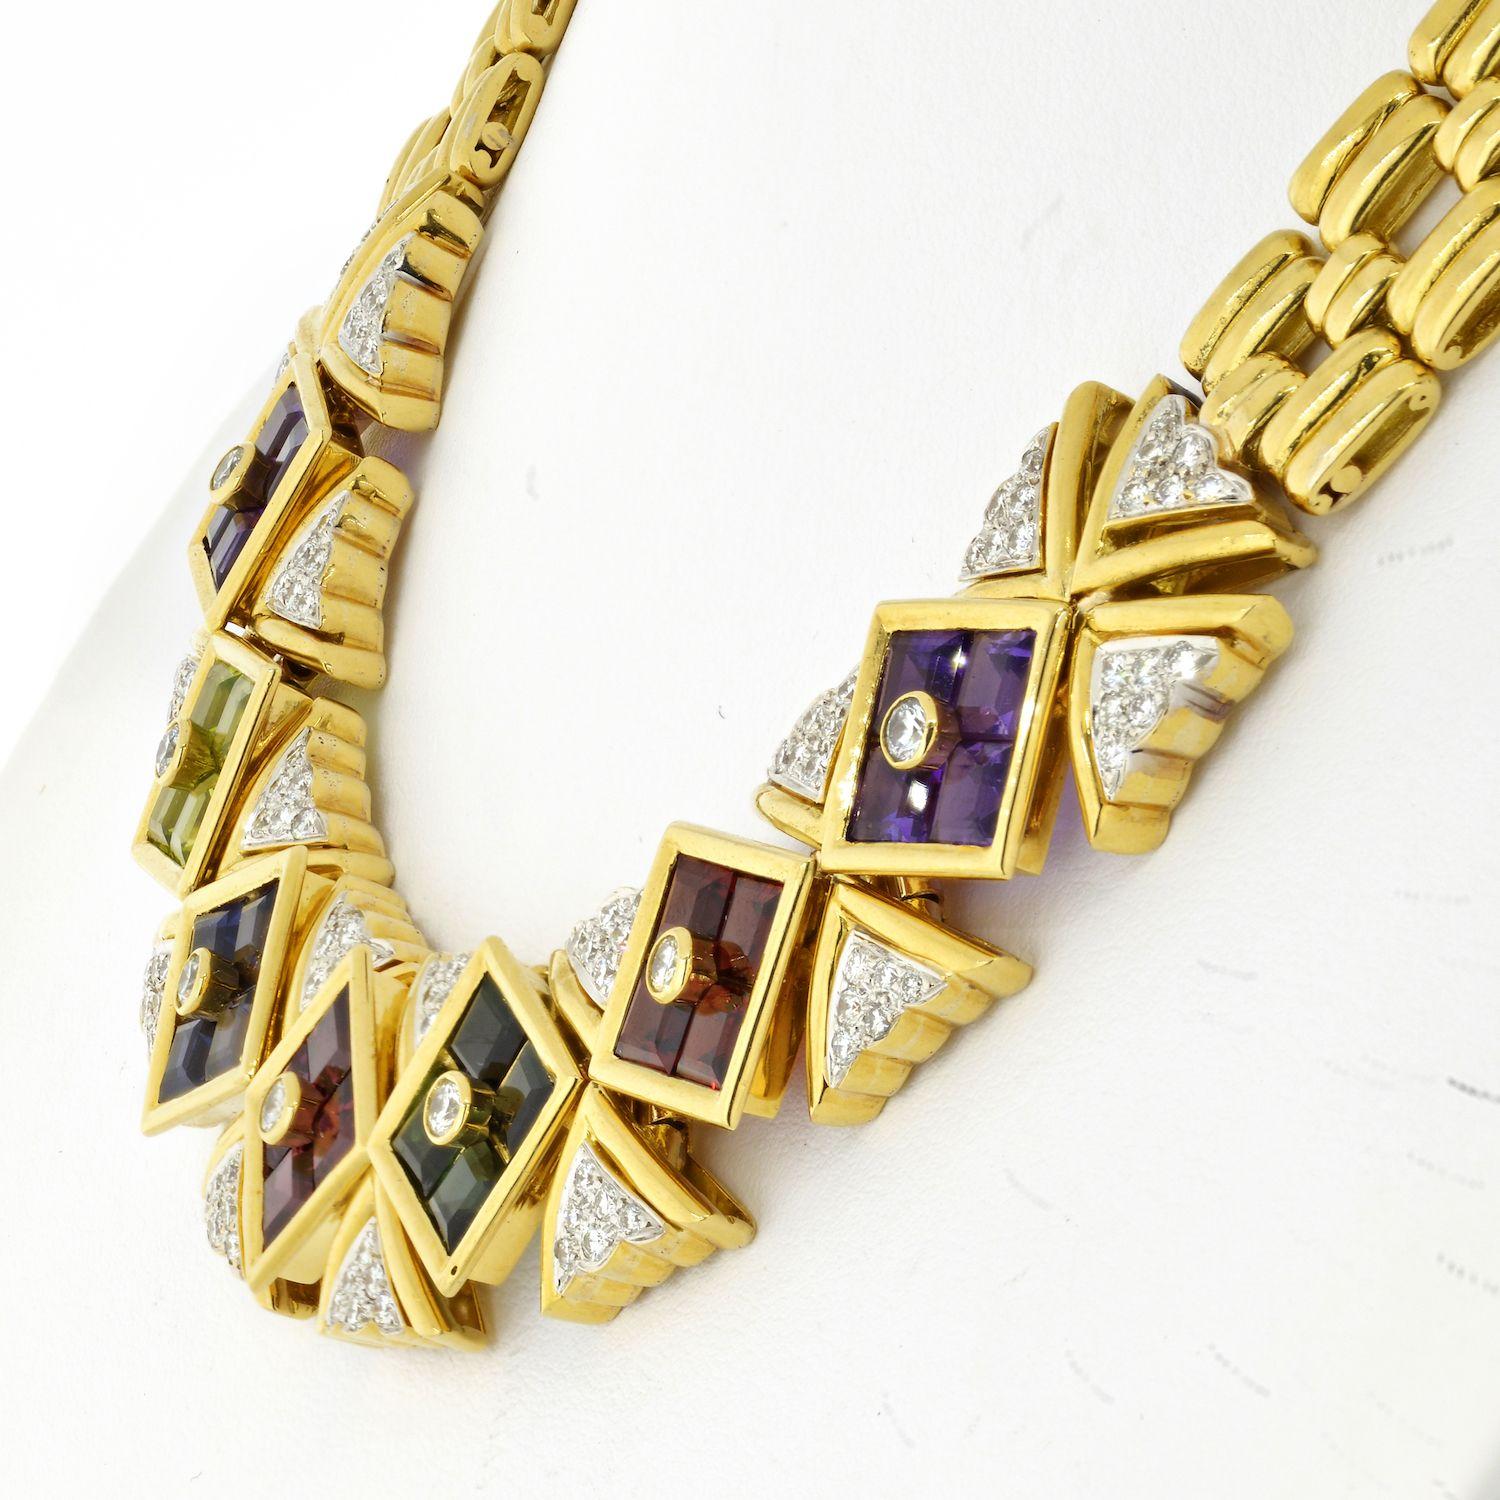 Spectacular 18k yellow gold multi-gem and diamond collar necklace by Paloma Picasso. Comprised of ribbed polished gold links with front facing invisible set square cut gemstones in polished gold surrounds amethyst, peridot, iolite, garnet and pink